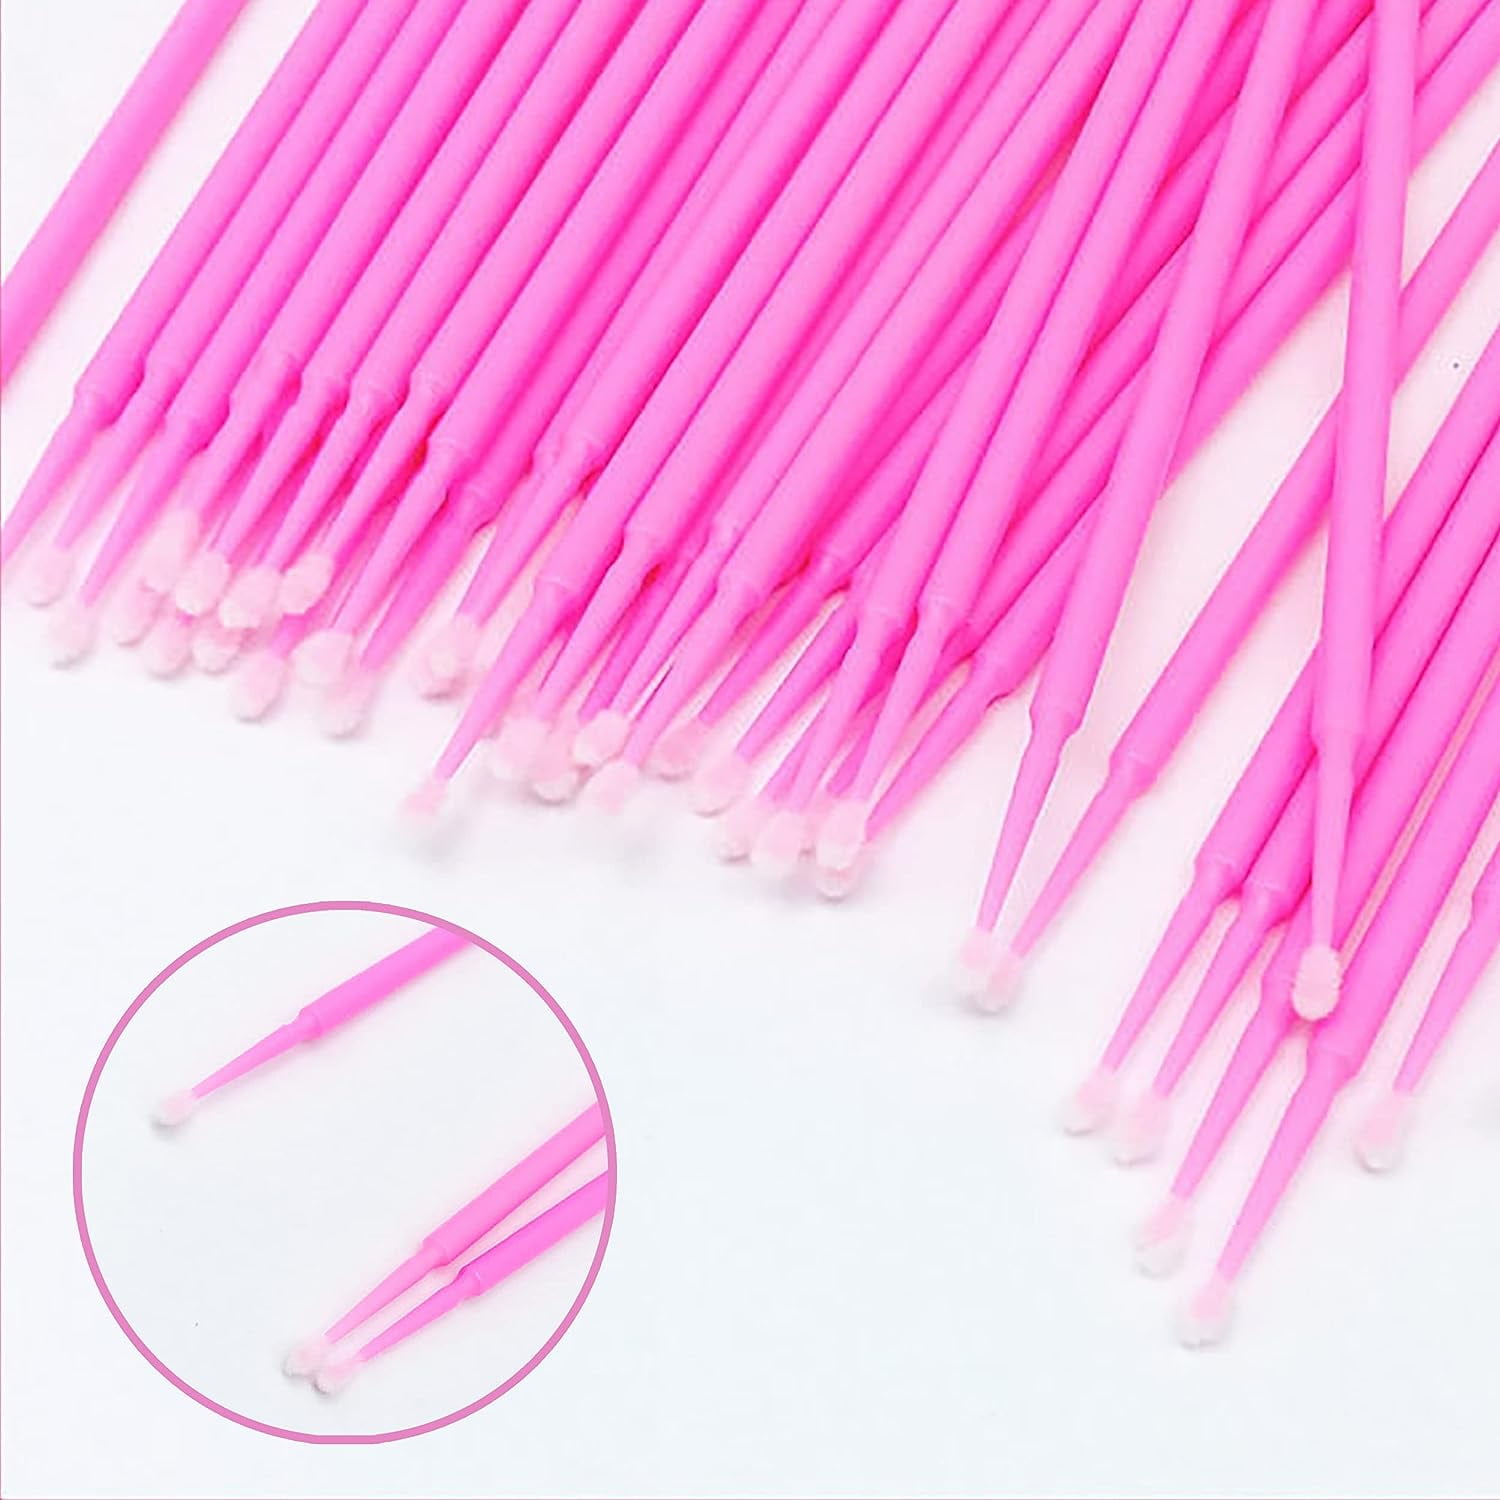 TCP Global Eyelash Extension Micro Brushes, 100 Medium 2.0 mm Tip Size Blue  Disposable Brush Applicators - Apply Makeup, Paint Touch Up